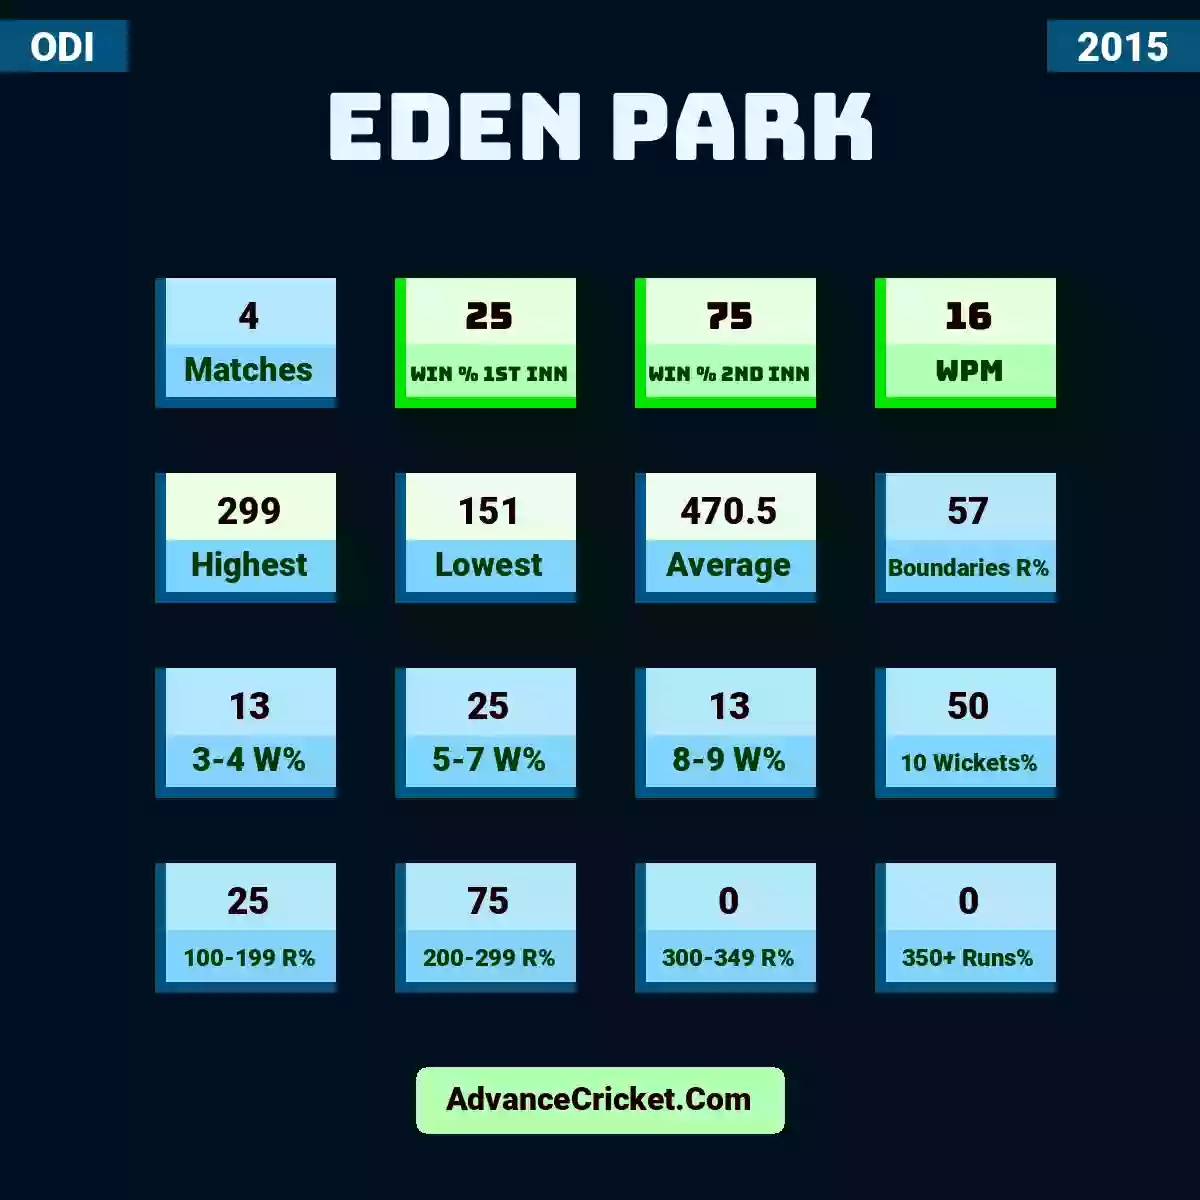 Image showing Eden Park with Matches: 4, Win % 1st Inn: 25, Win % 2nd Inn: 75, WPM: 16, Highest: 299, Lowest: 151, Average: 470.5, Boundaries R%: 57, 3-4 W%: 13, 5-7 W%: 25, 8-9 W%: 13, 10 Wickets%: 50, 100-199 R%: 25, 200-299 R%: 75, 300-349 R%: 0, 350+ Runs%: 0.